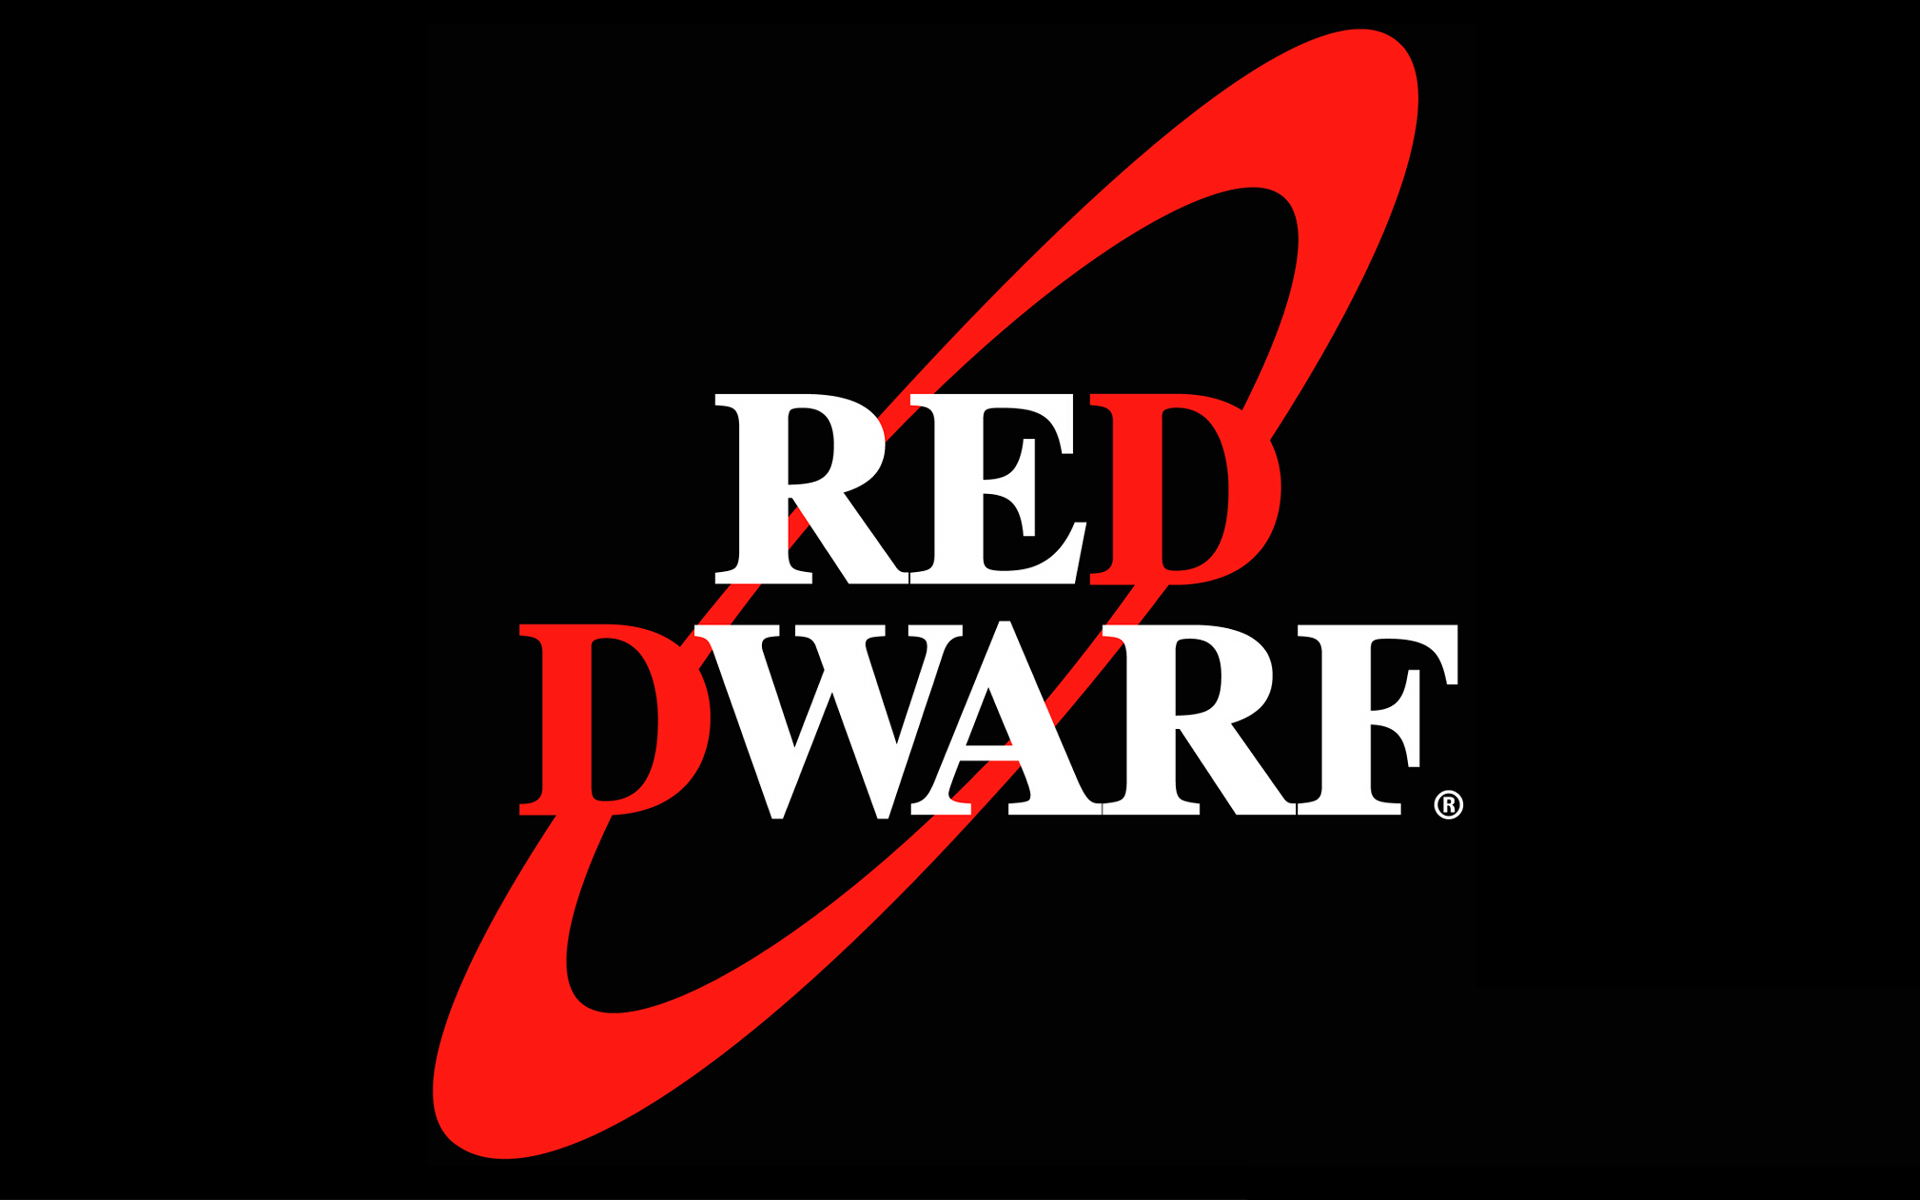 1920x1200 10+ Red Dwarf (TV Show) &eacute;&laquo;&#152;&aelig;&cedil;&#133;&aring;&pound;&#129;&ccedil;&ordm;&cedil;, &aelig;&iexcl;&#140;&eacute;&#157;&cent;&egrave;&#131;&#140;&aelig;&#153;&macr